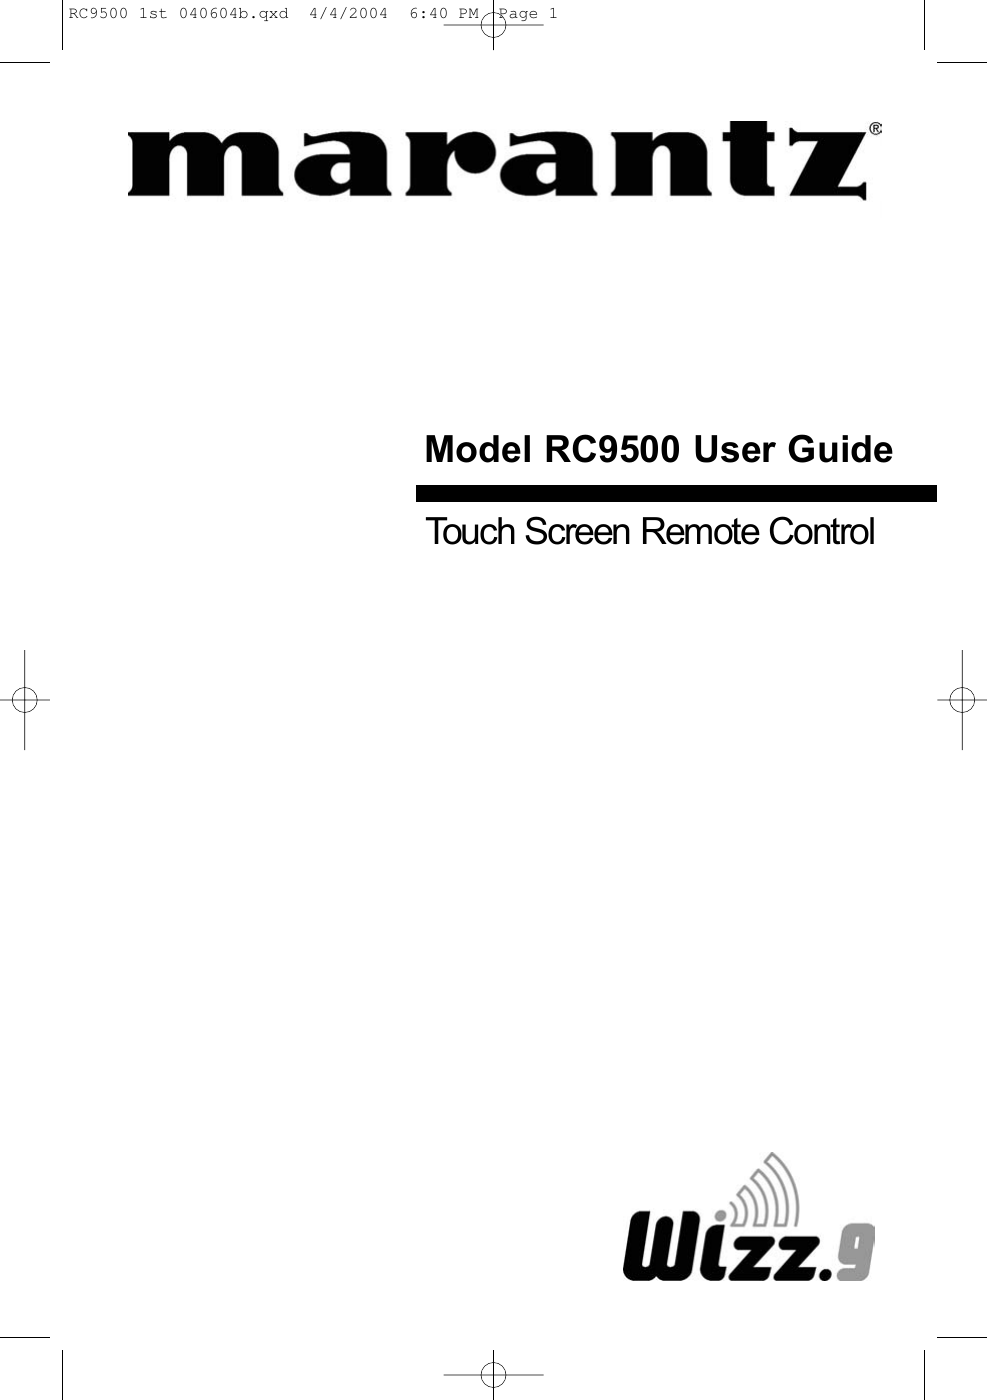 Model RC9500 User GuideTouch Screen Remote ControlRC9500 1st 040604b.qxd  4/4/2004  6:40 PM  Page 1